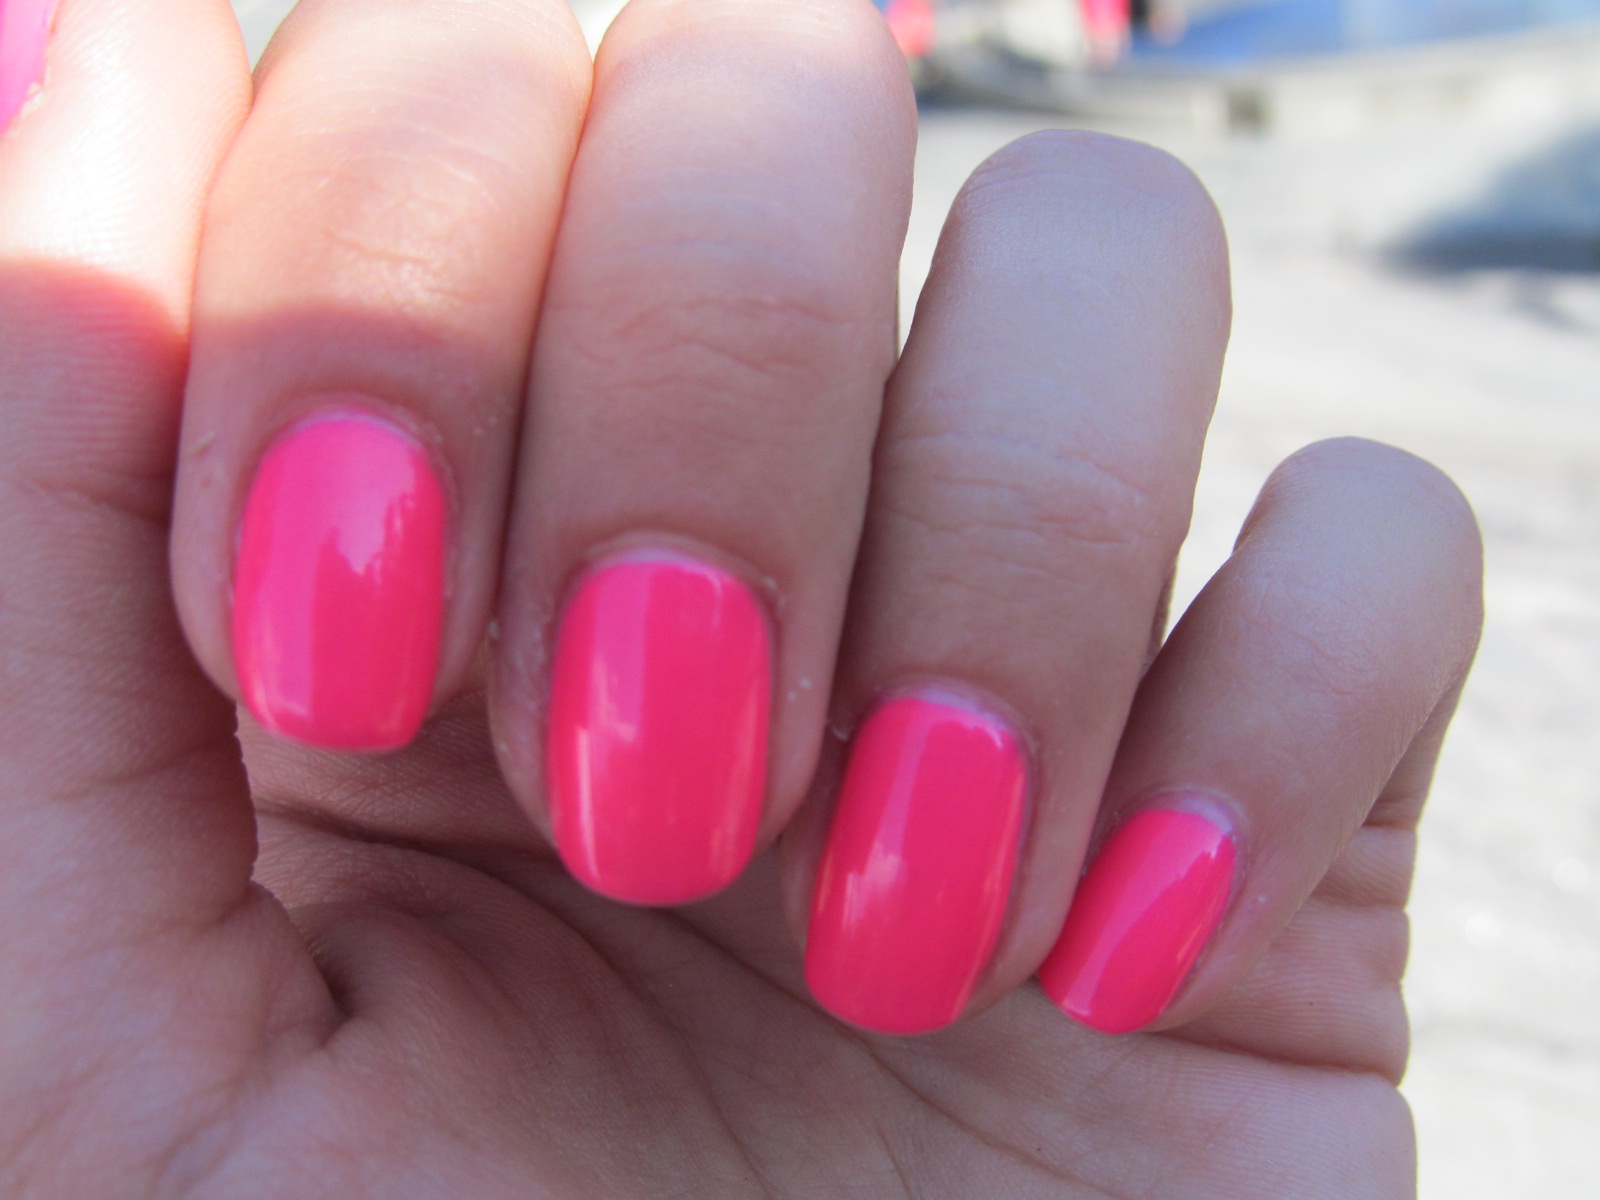 9. Sinful Colors Professional Nail Polish in "Cream Pink" - wide 6